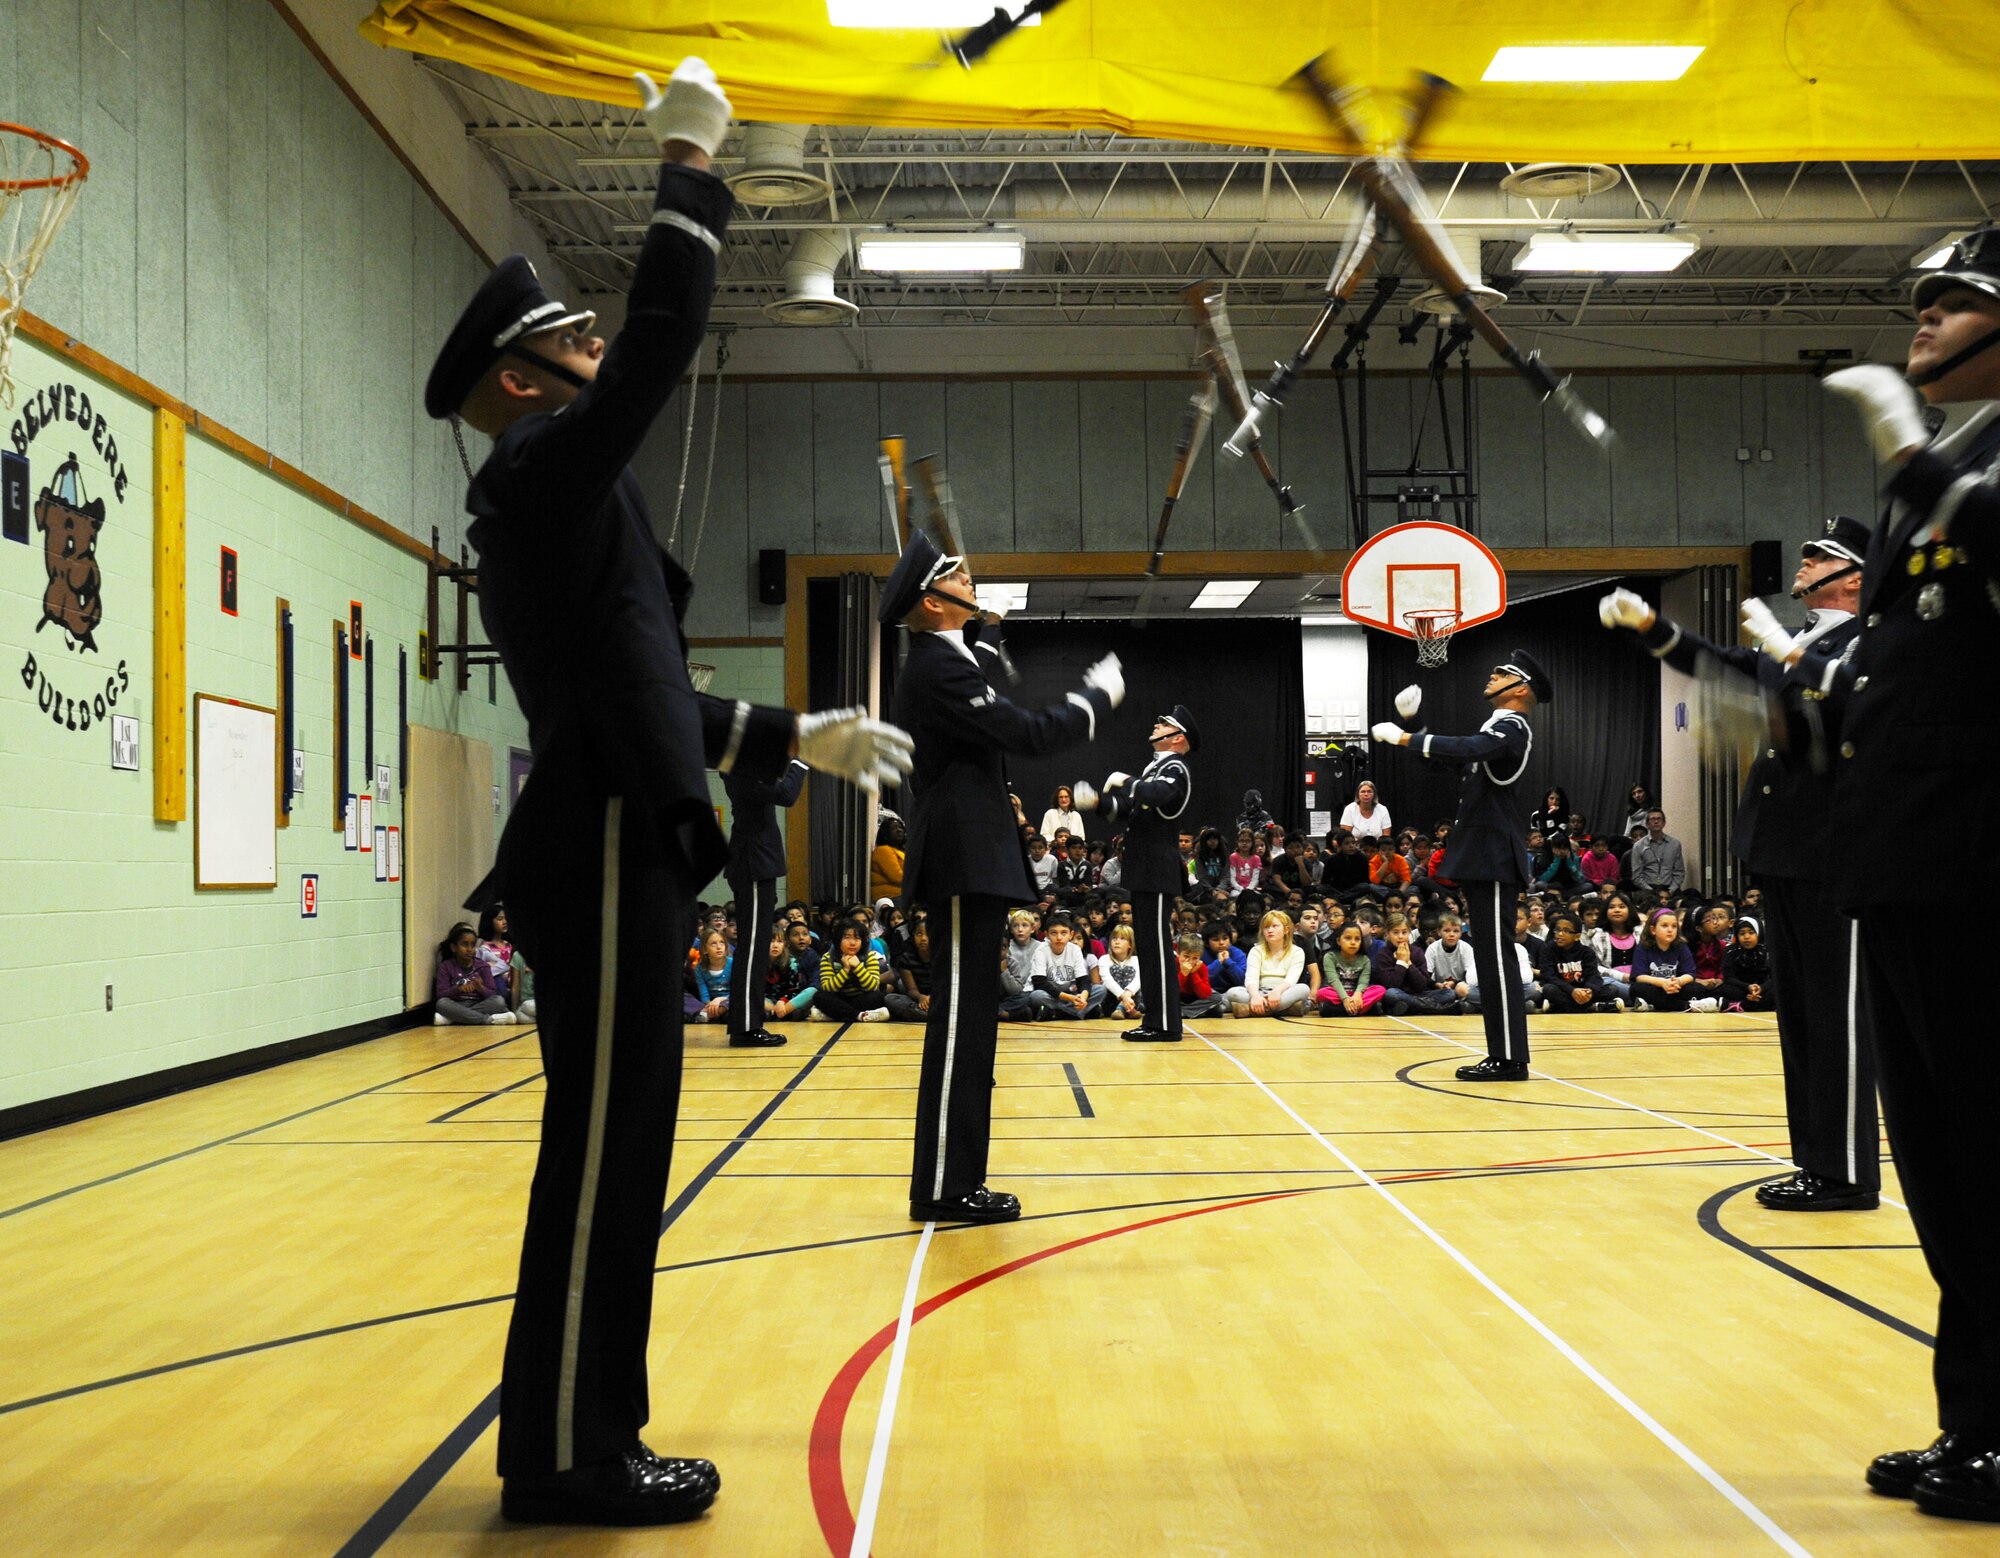 Members of the U.S. Air Force Honor Guard Drill Team toss their M-1 rifles during a performance at Belvedere Elementary School in Falls Church, Va., Nov. 26, 2012.   Inspiring patriotism and garnering interest in the U.S. Air Force are key aspects of the Drill Team mission.  (U.S. Air Force photo/Staff Sgt. Torey Griffith)